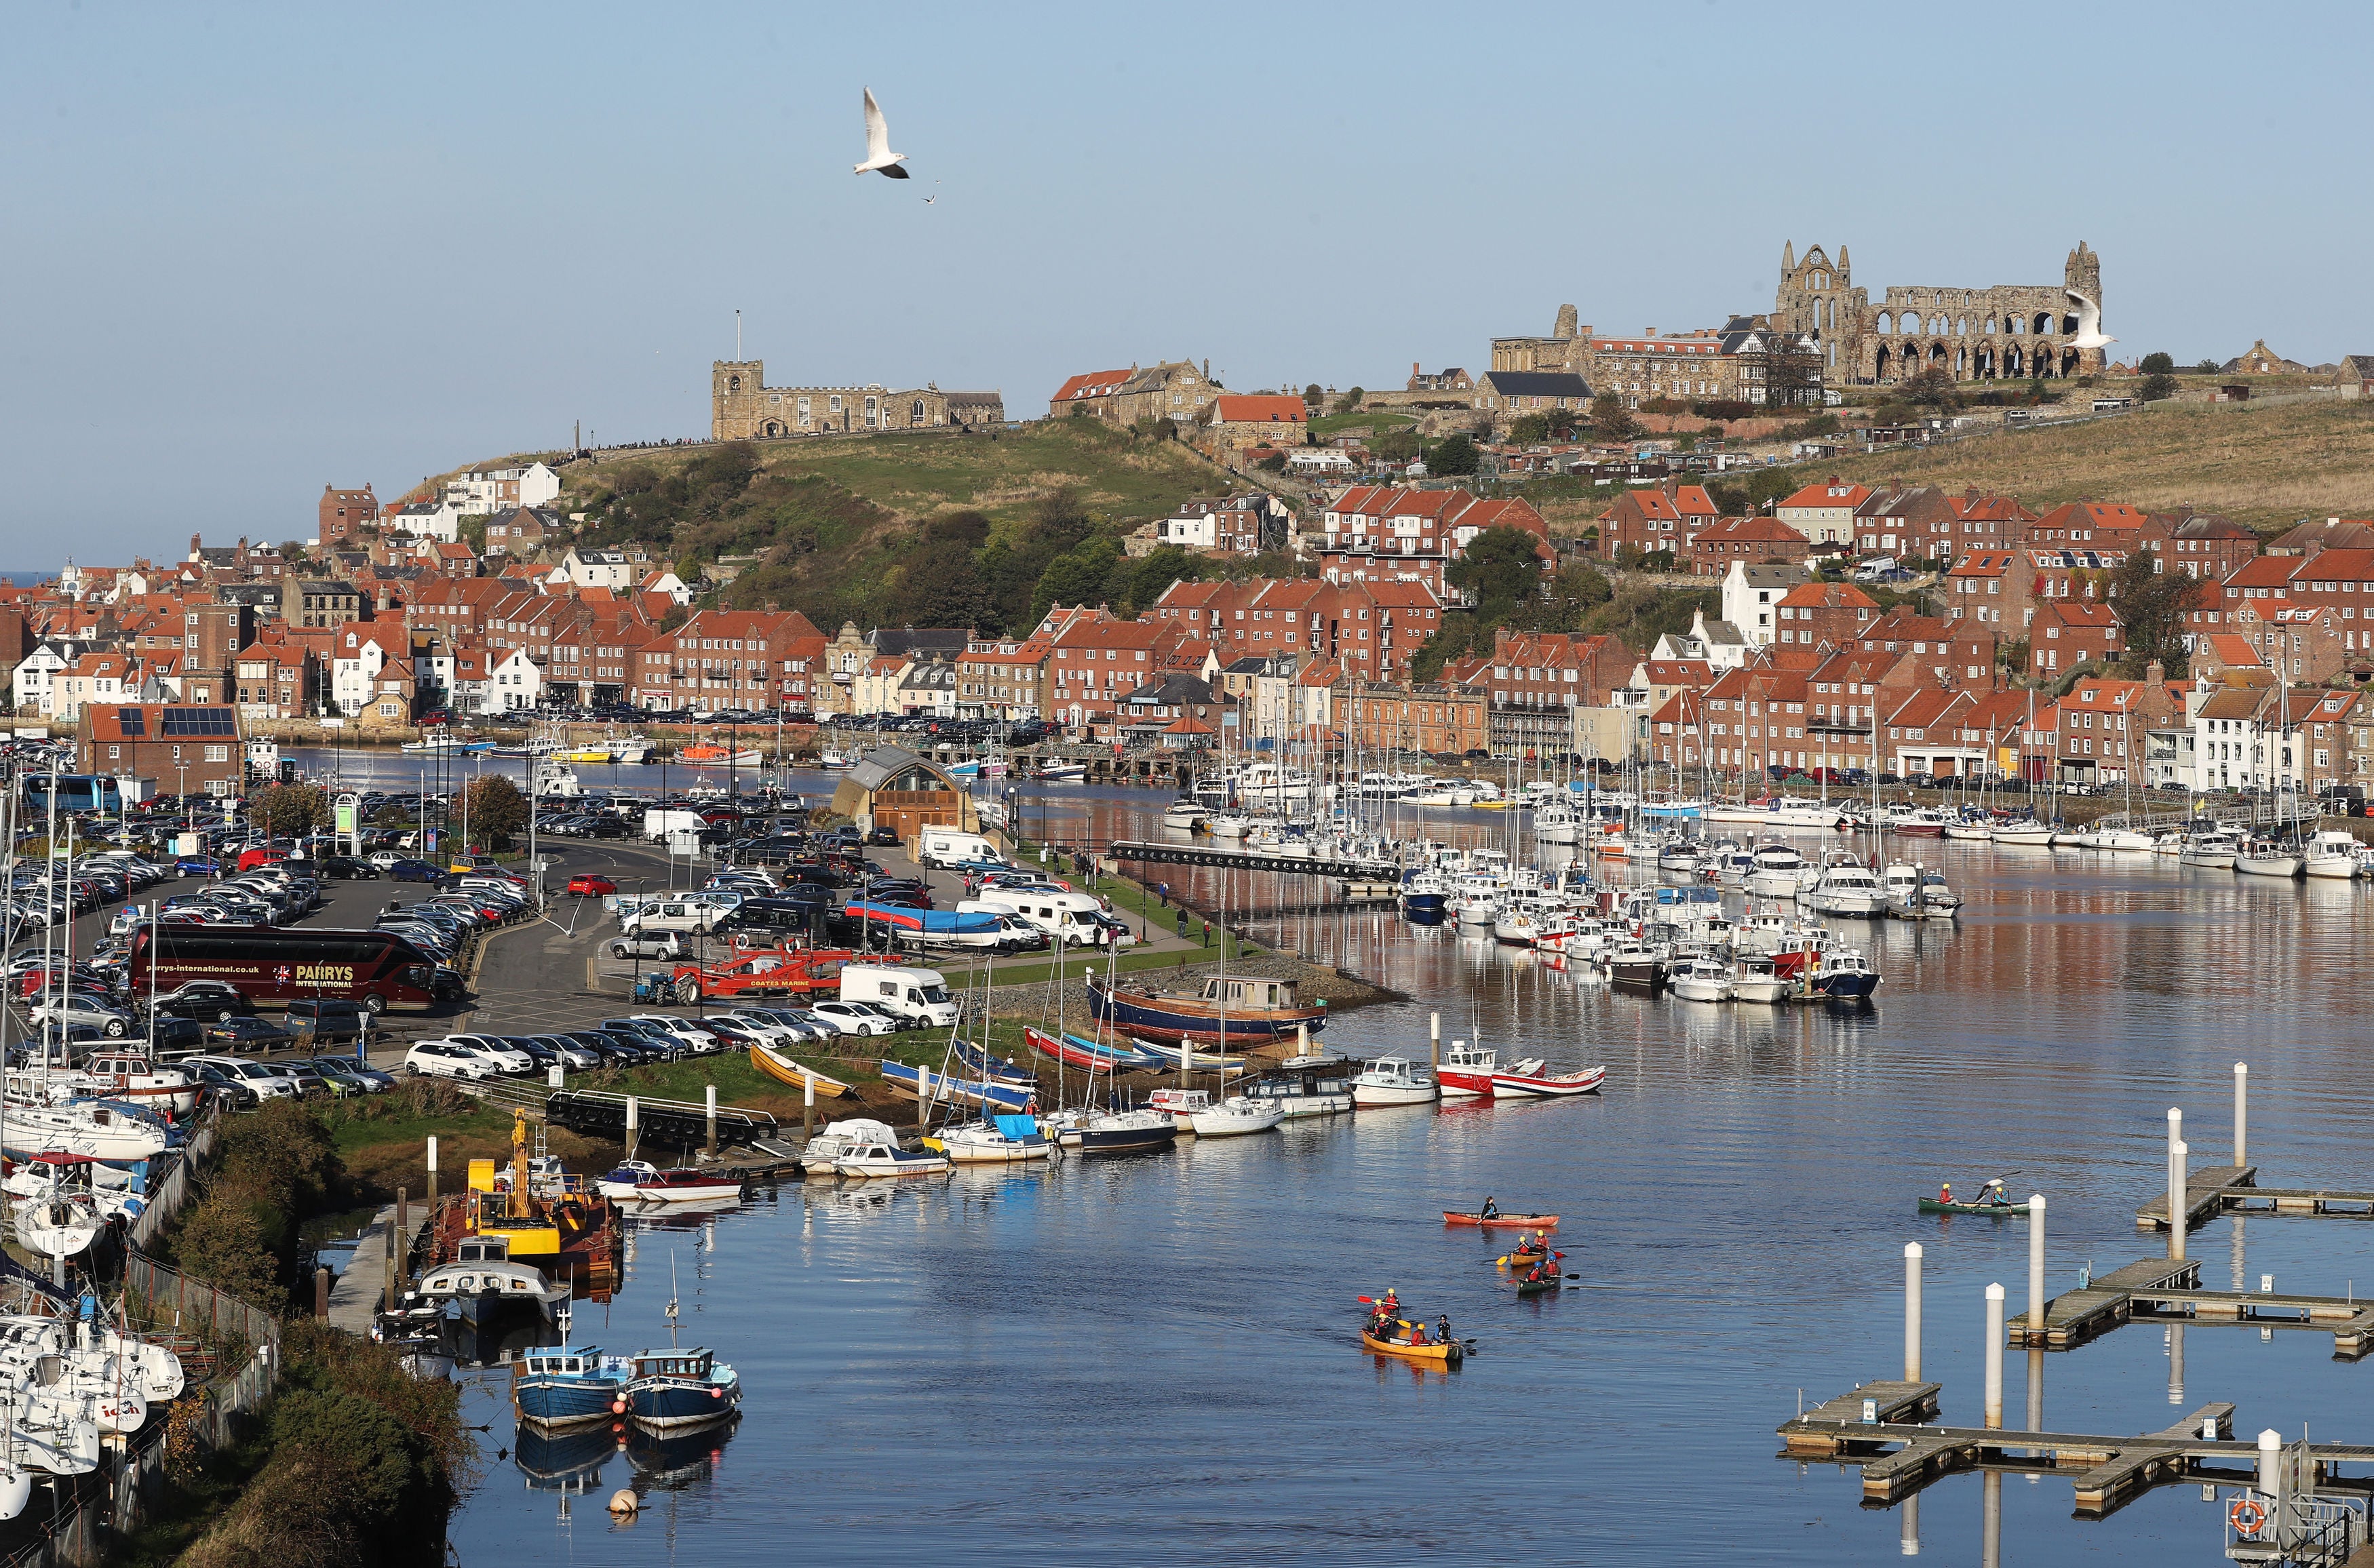 Canoeists in Milton Harbour in the picturesque town of Whitby, North Yorkshire. (Owen Humphreys/PA)